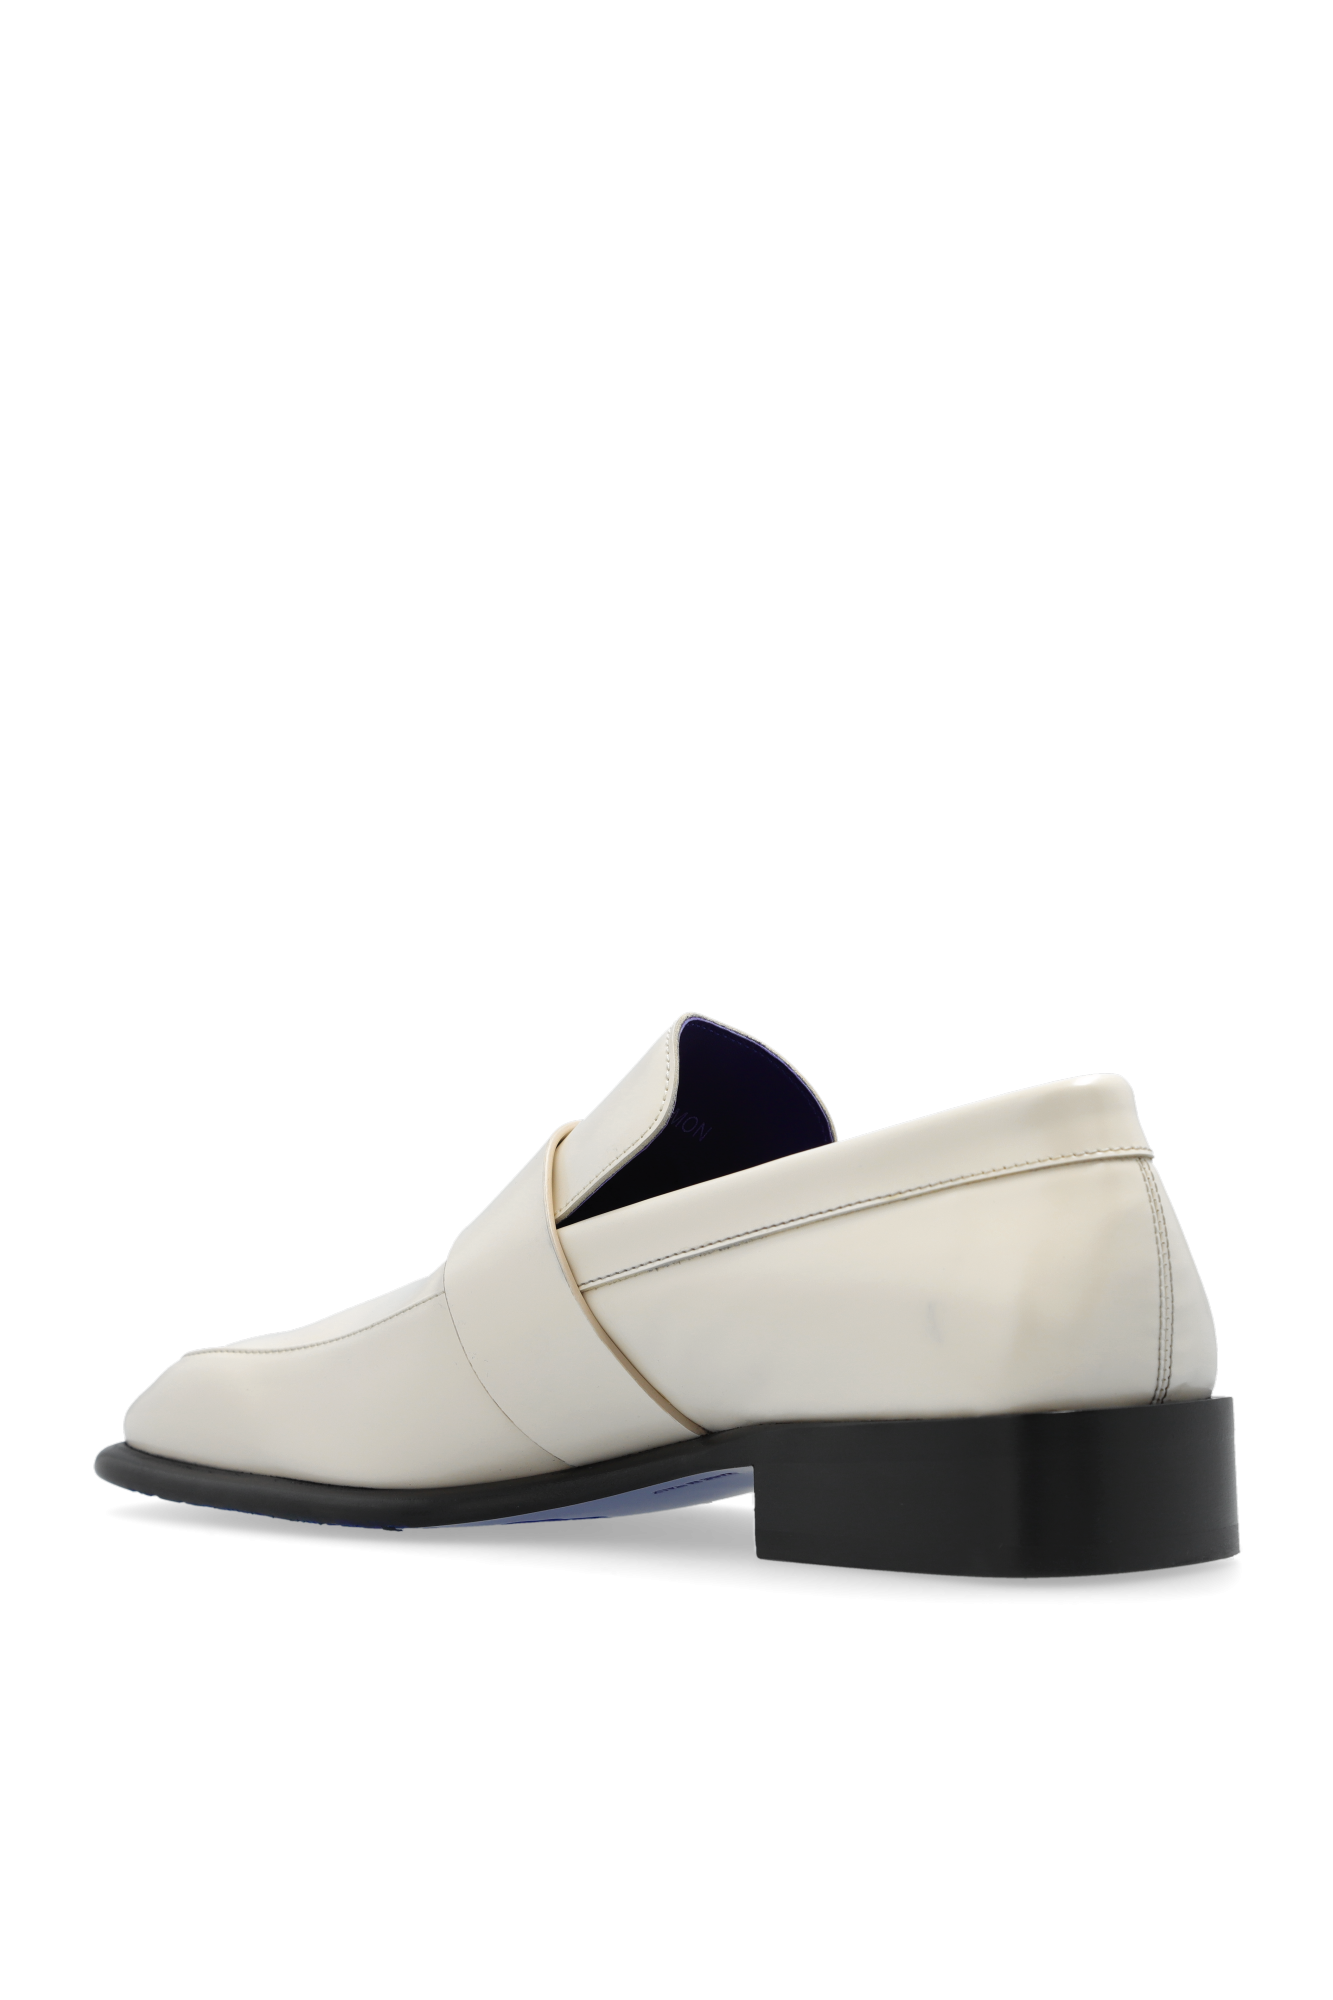 Burberry ‘Shield’ loafers shoes